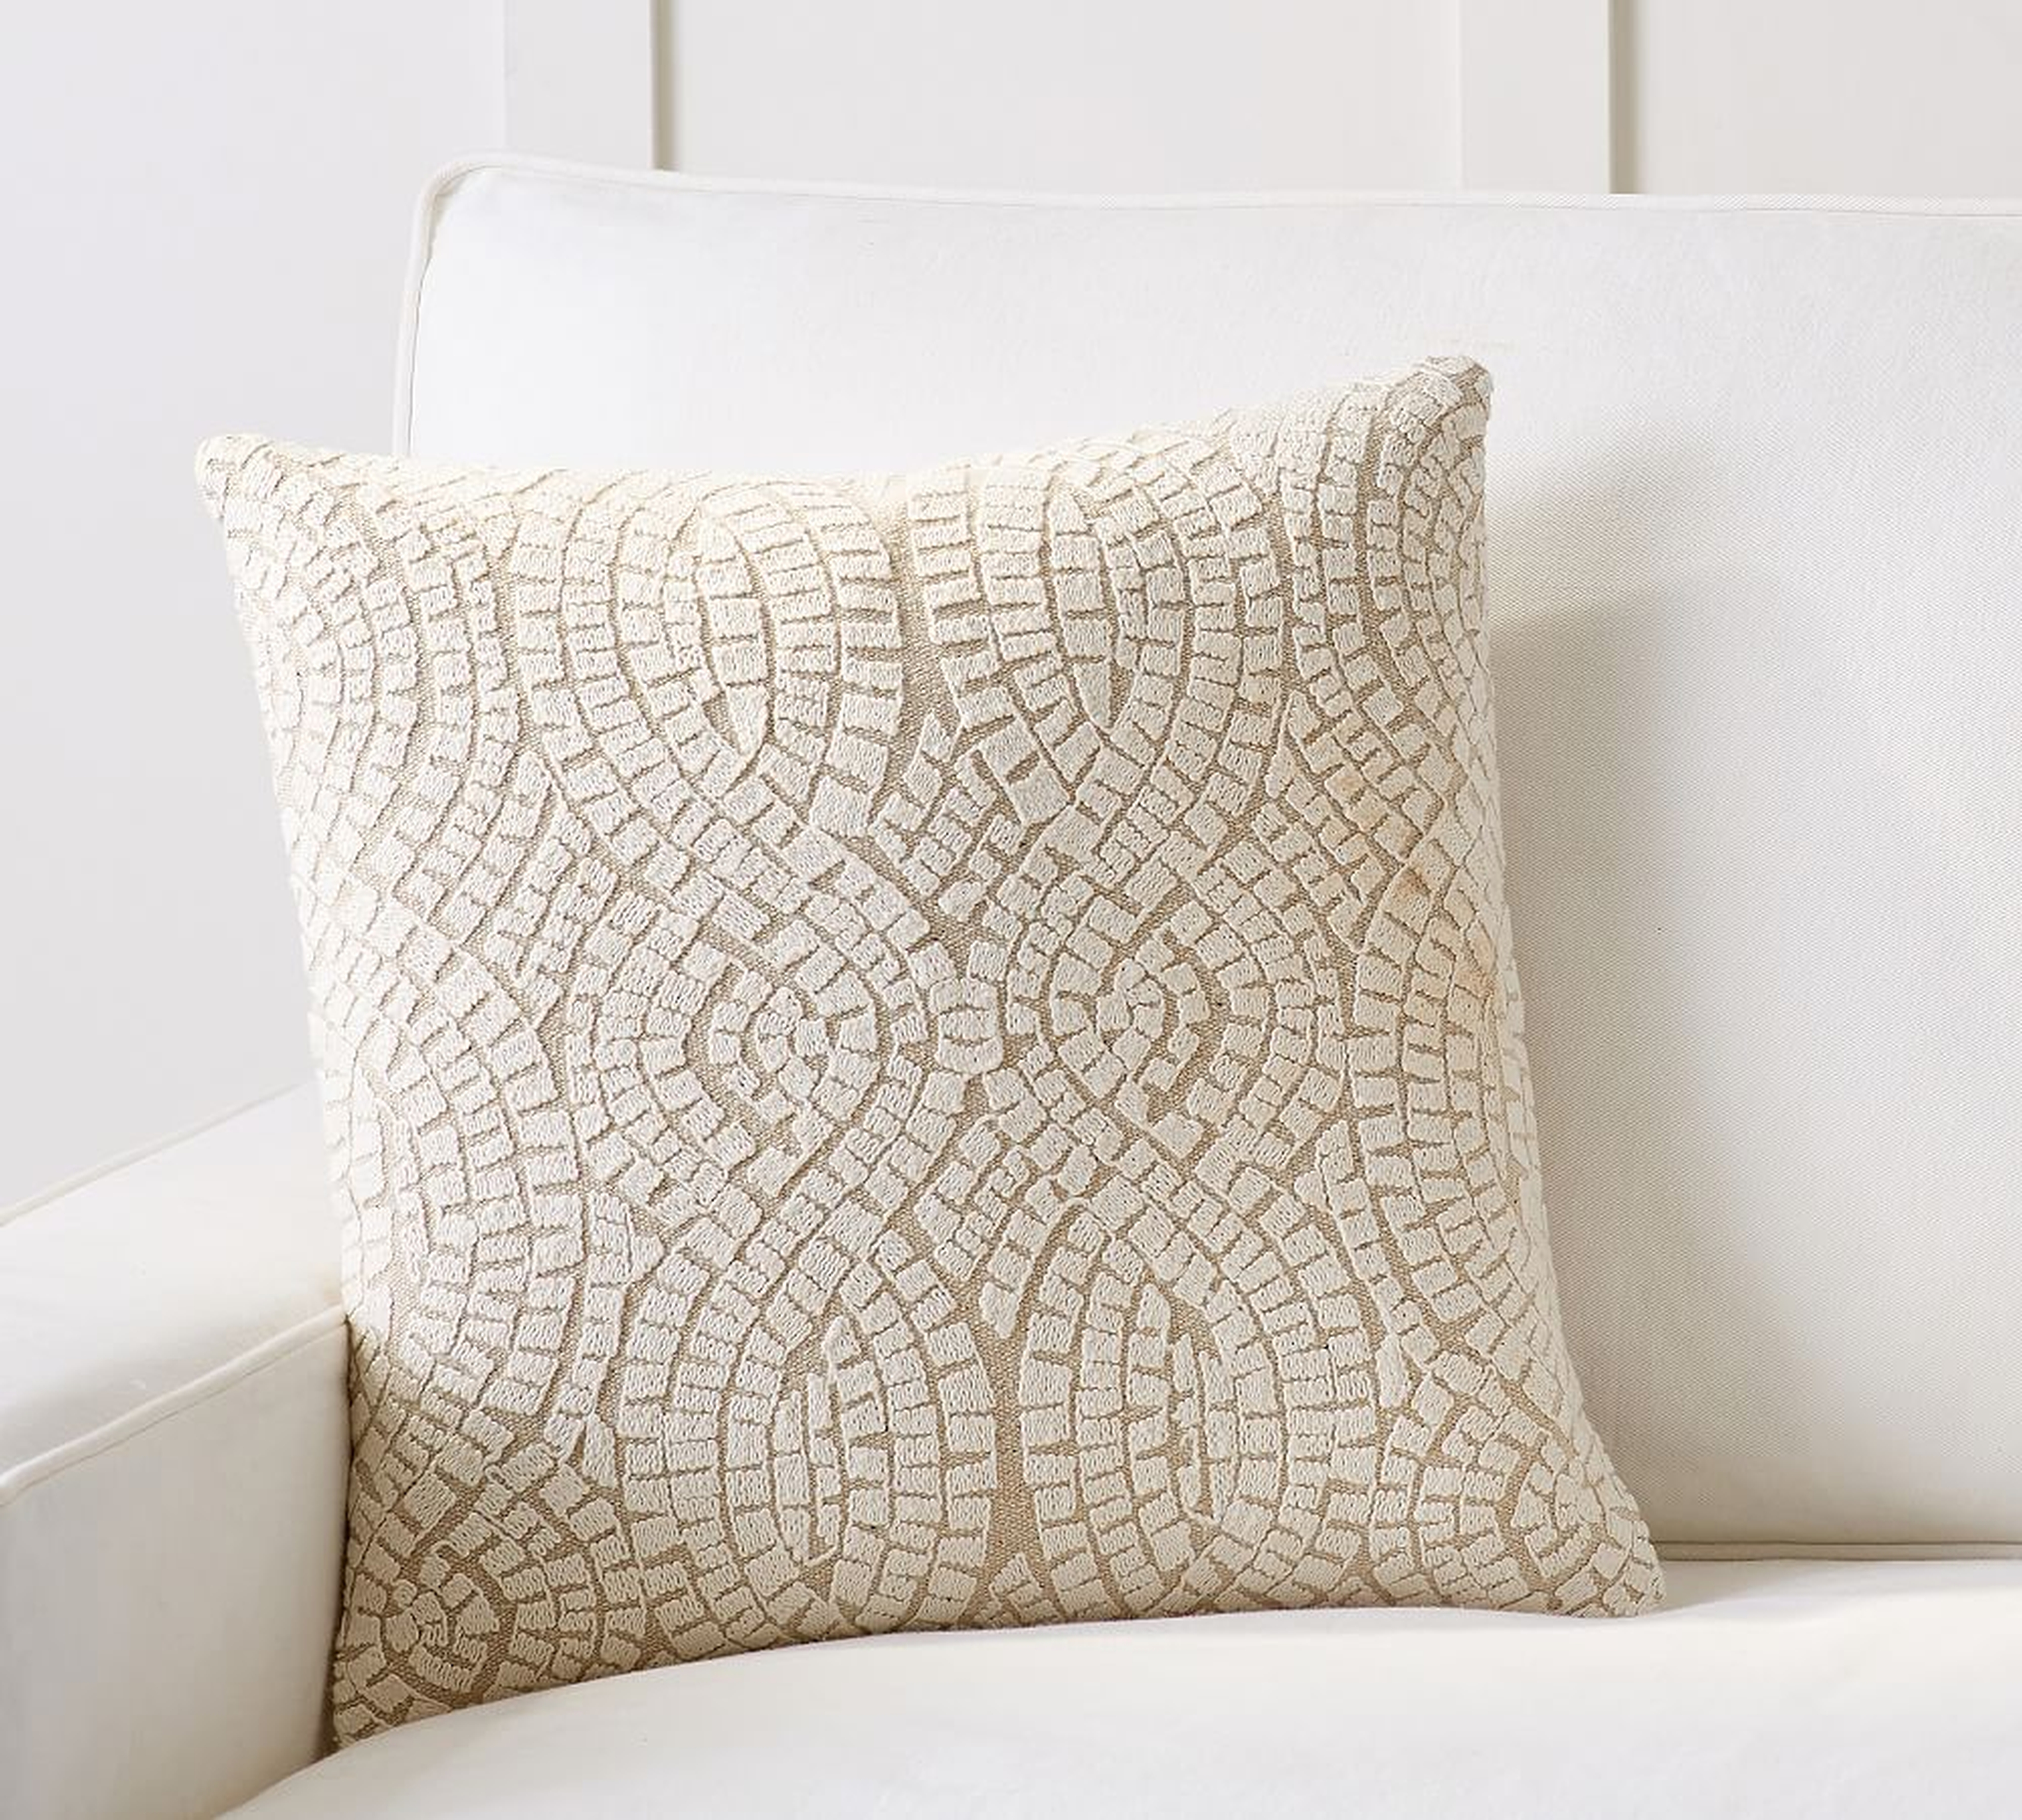 Carmel Embroidered Pillow Cover, 18 x 18", Flax - Pottery Barn